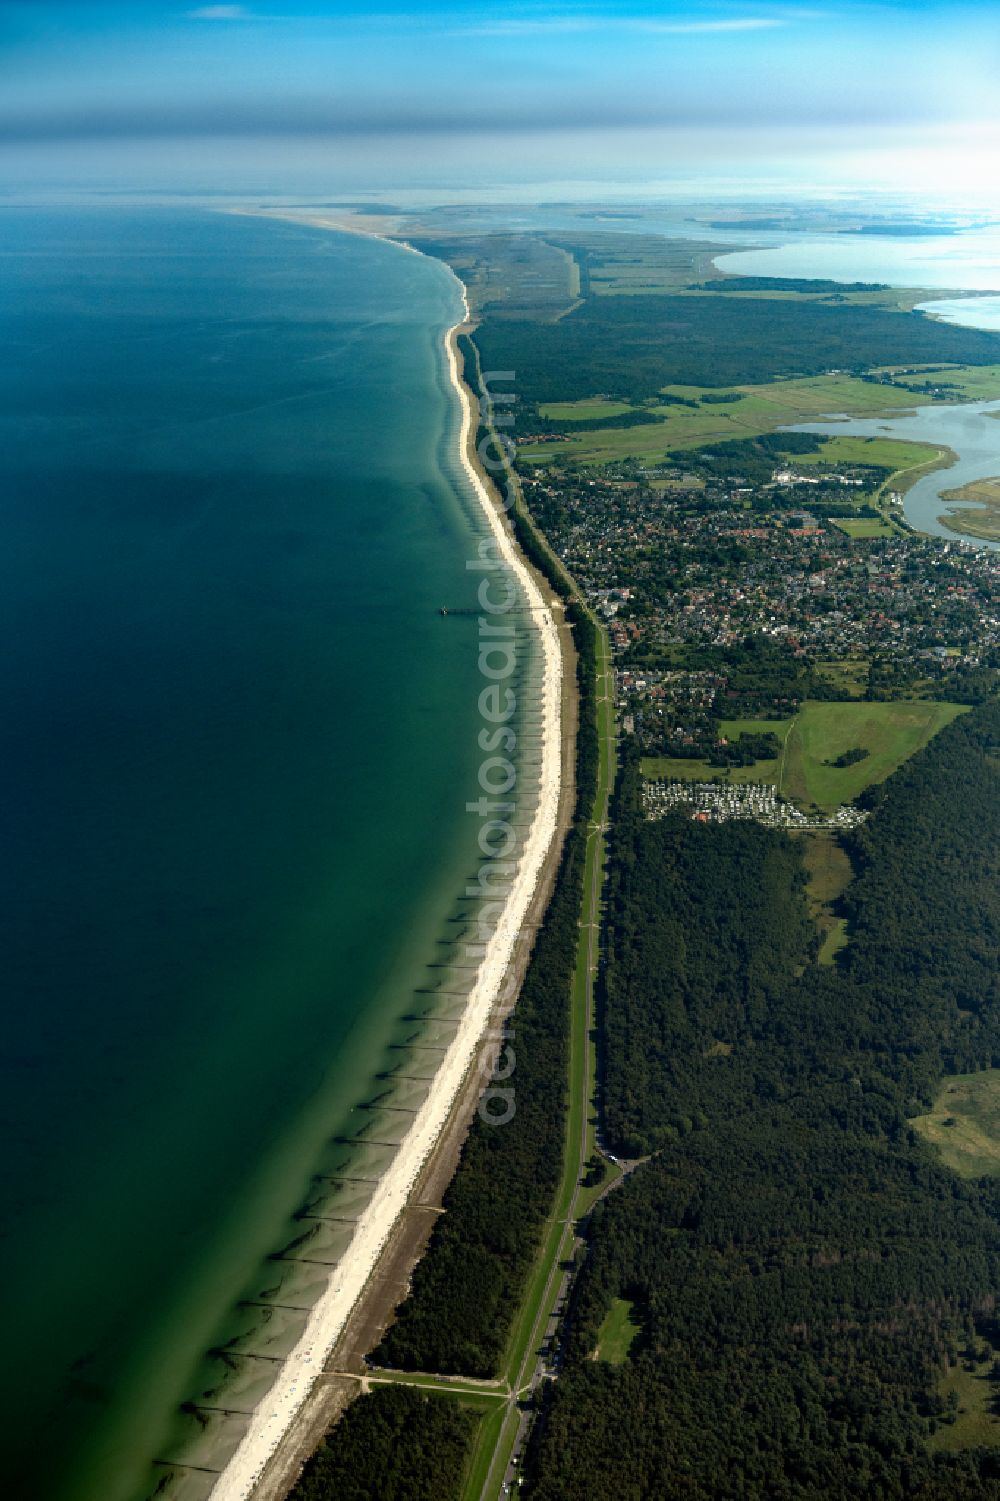 Zingst from the bird's eye view: Coastline on the sandy beach of Ostsee on Darss in Zingst at the baltic coast in the state Mecklenburg - Western Pomerania, Germany